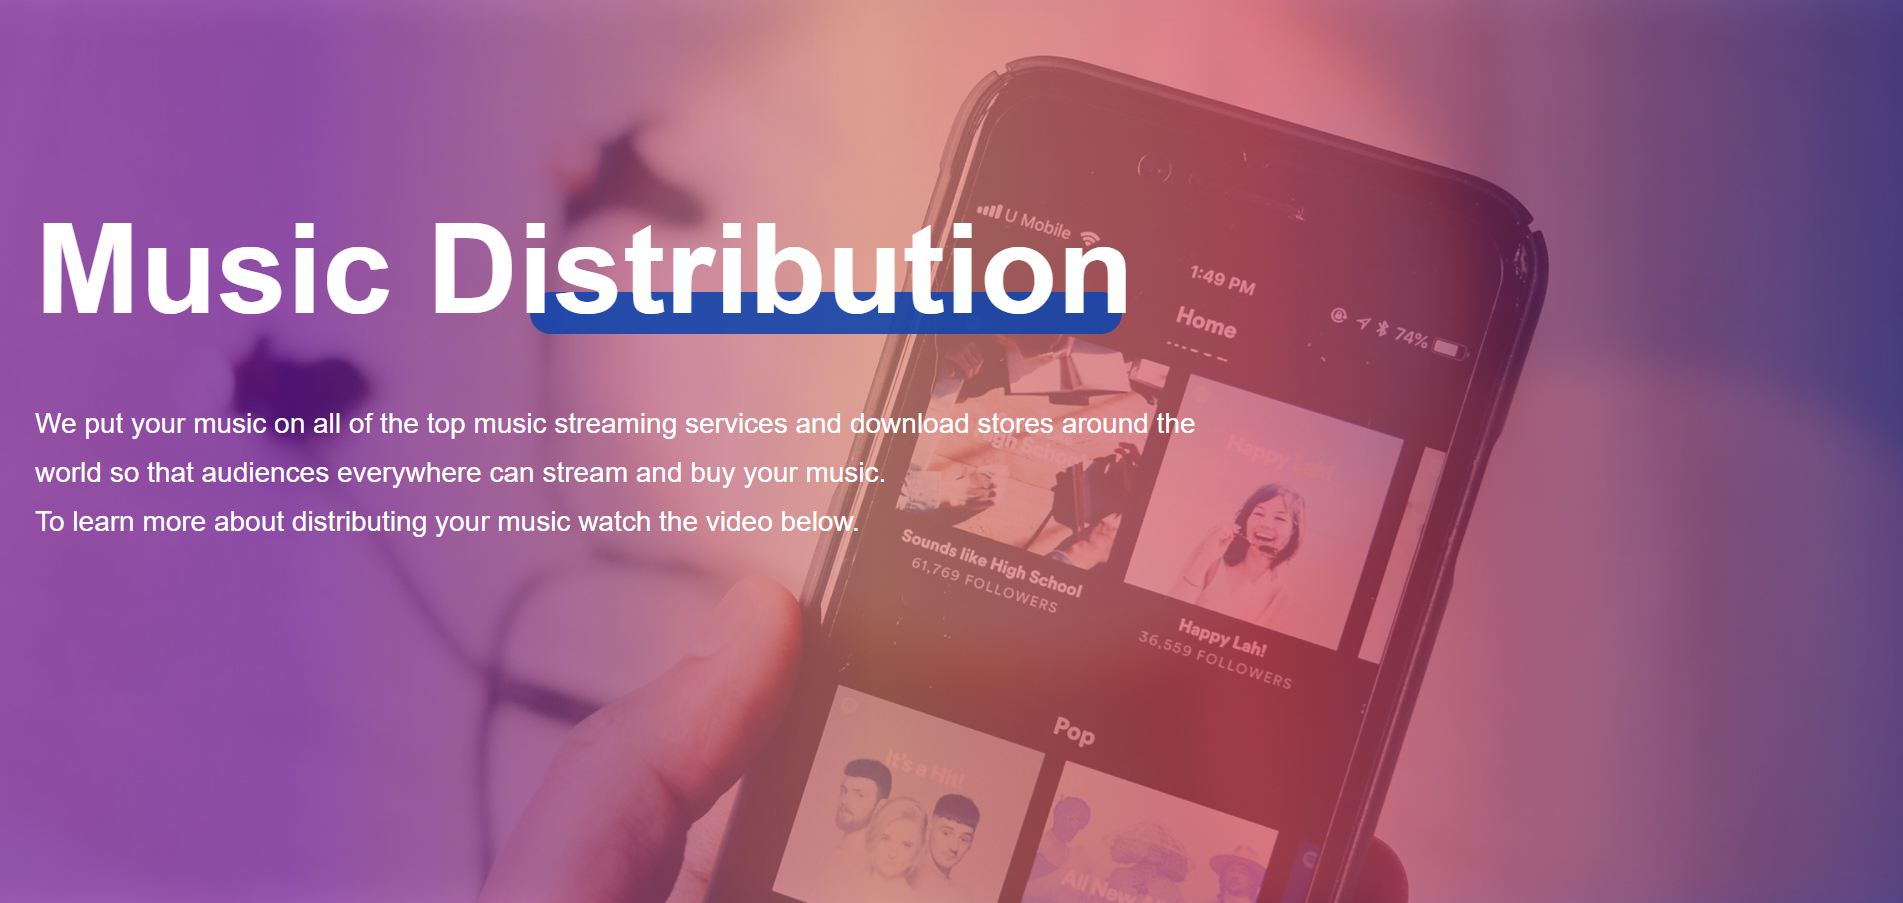 Music distribution online – how to upload your music to stores and streaming services